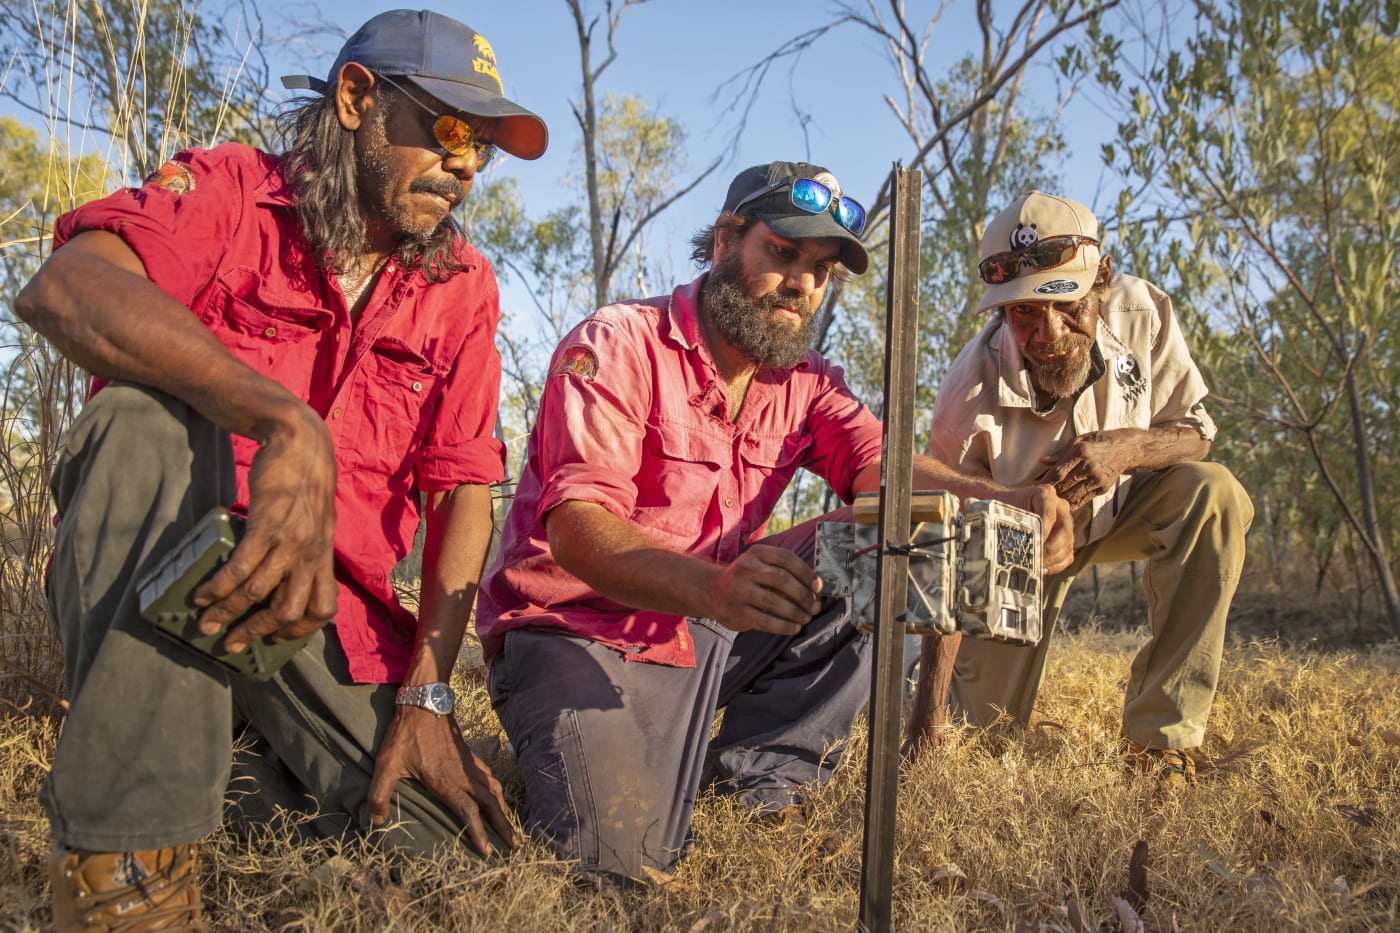 Nyaliga Rangers Thomas Birch (left) and Silas Purcell (middle) and WWF's Pius Gregory setting up a camera trap.